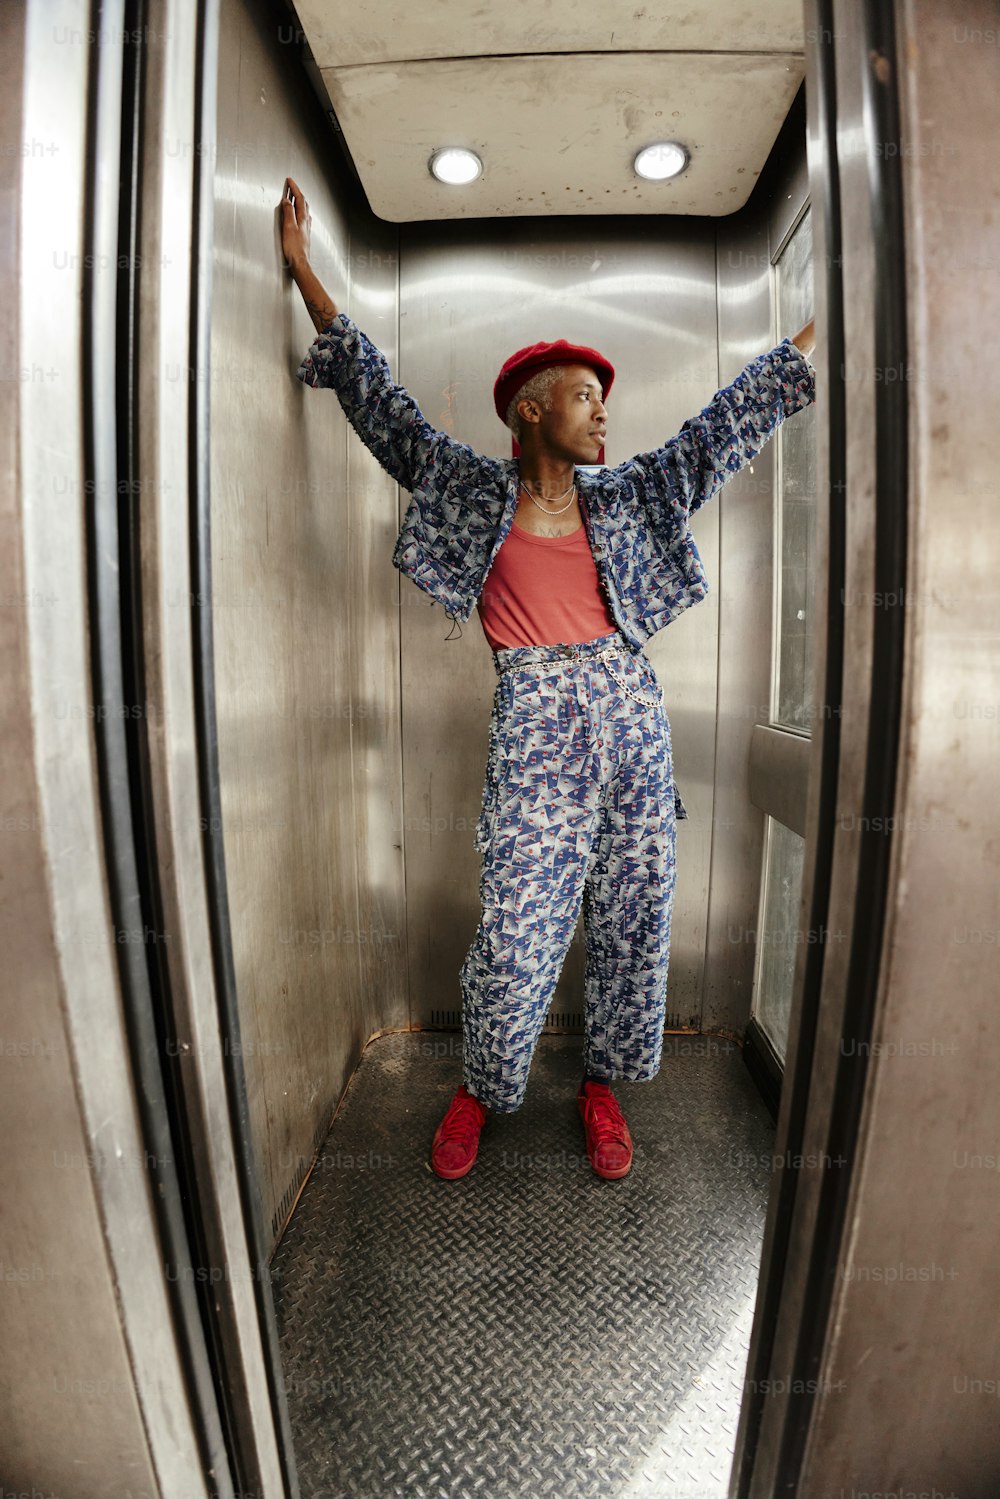 a woman in a red hat is standing in an elevator